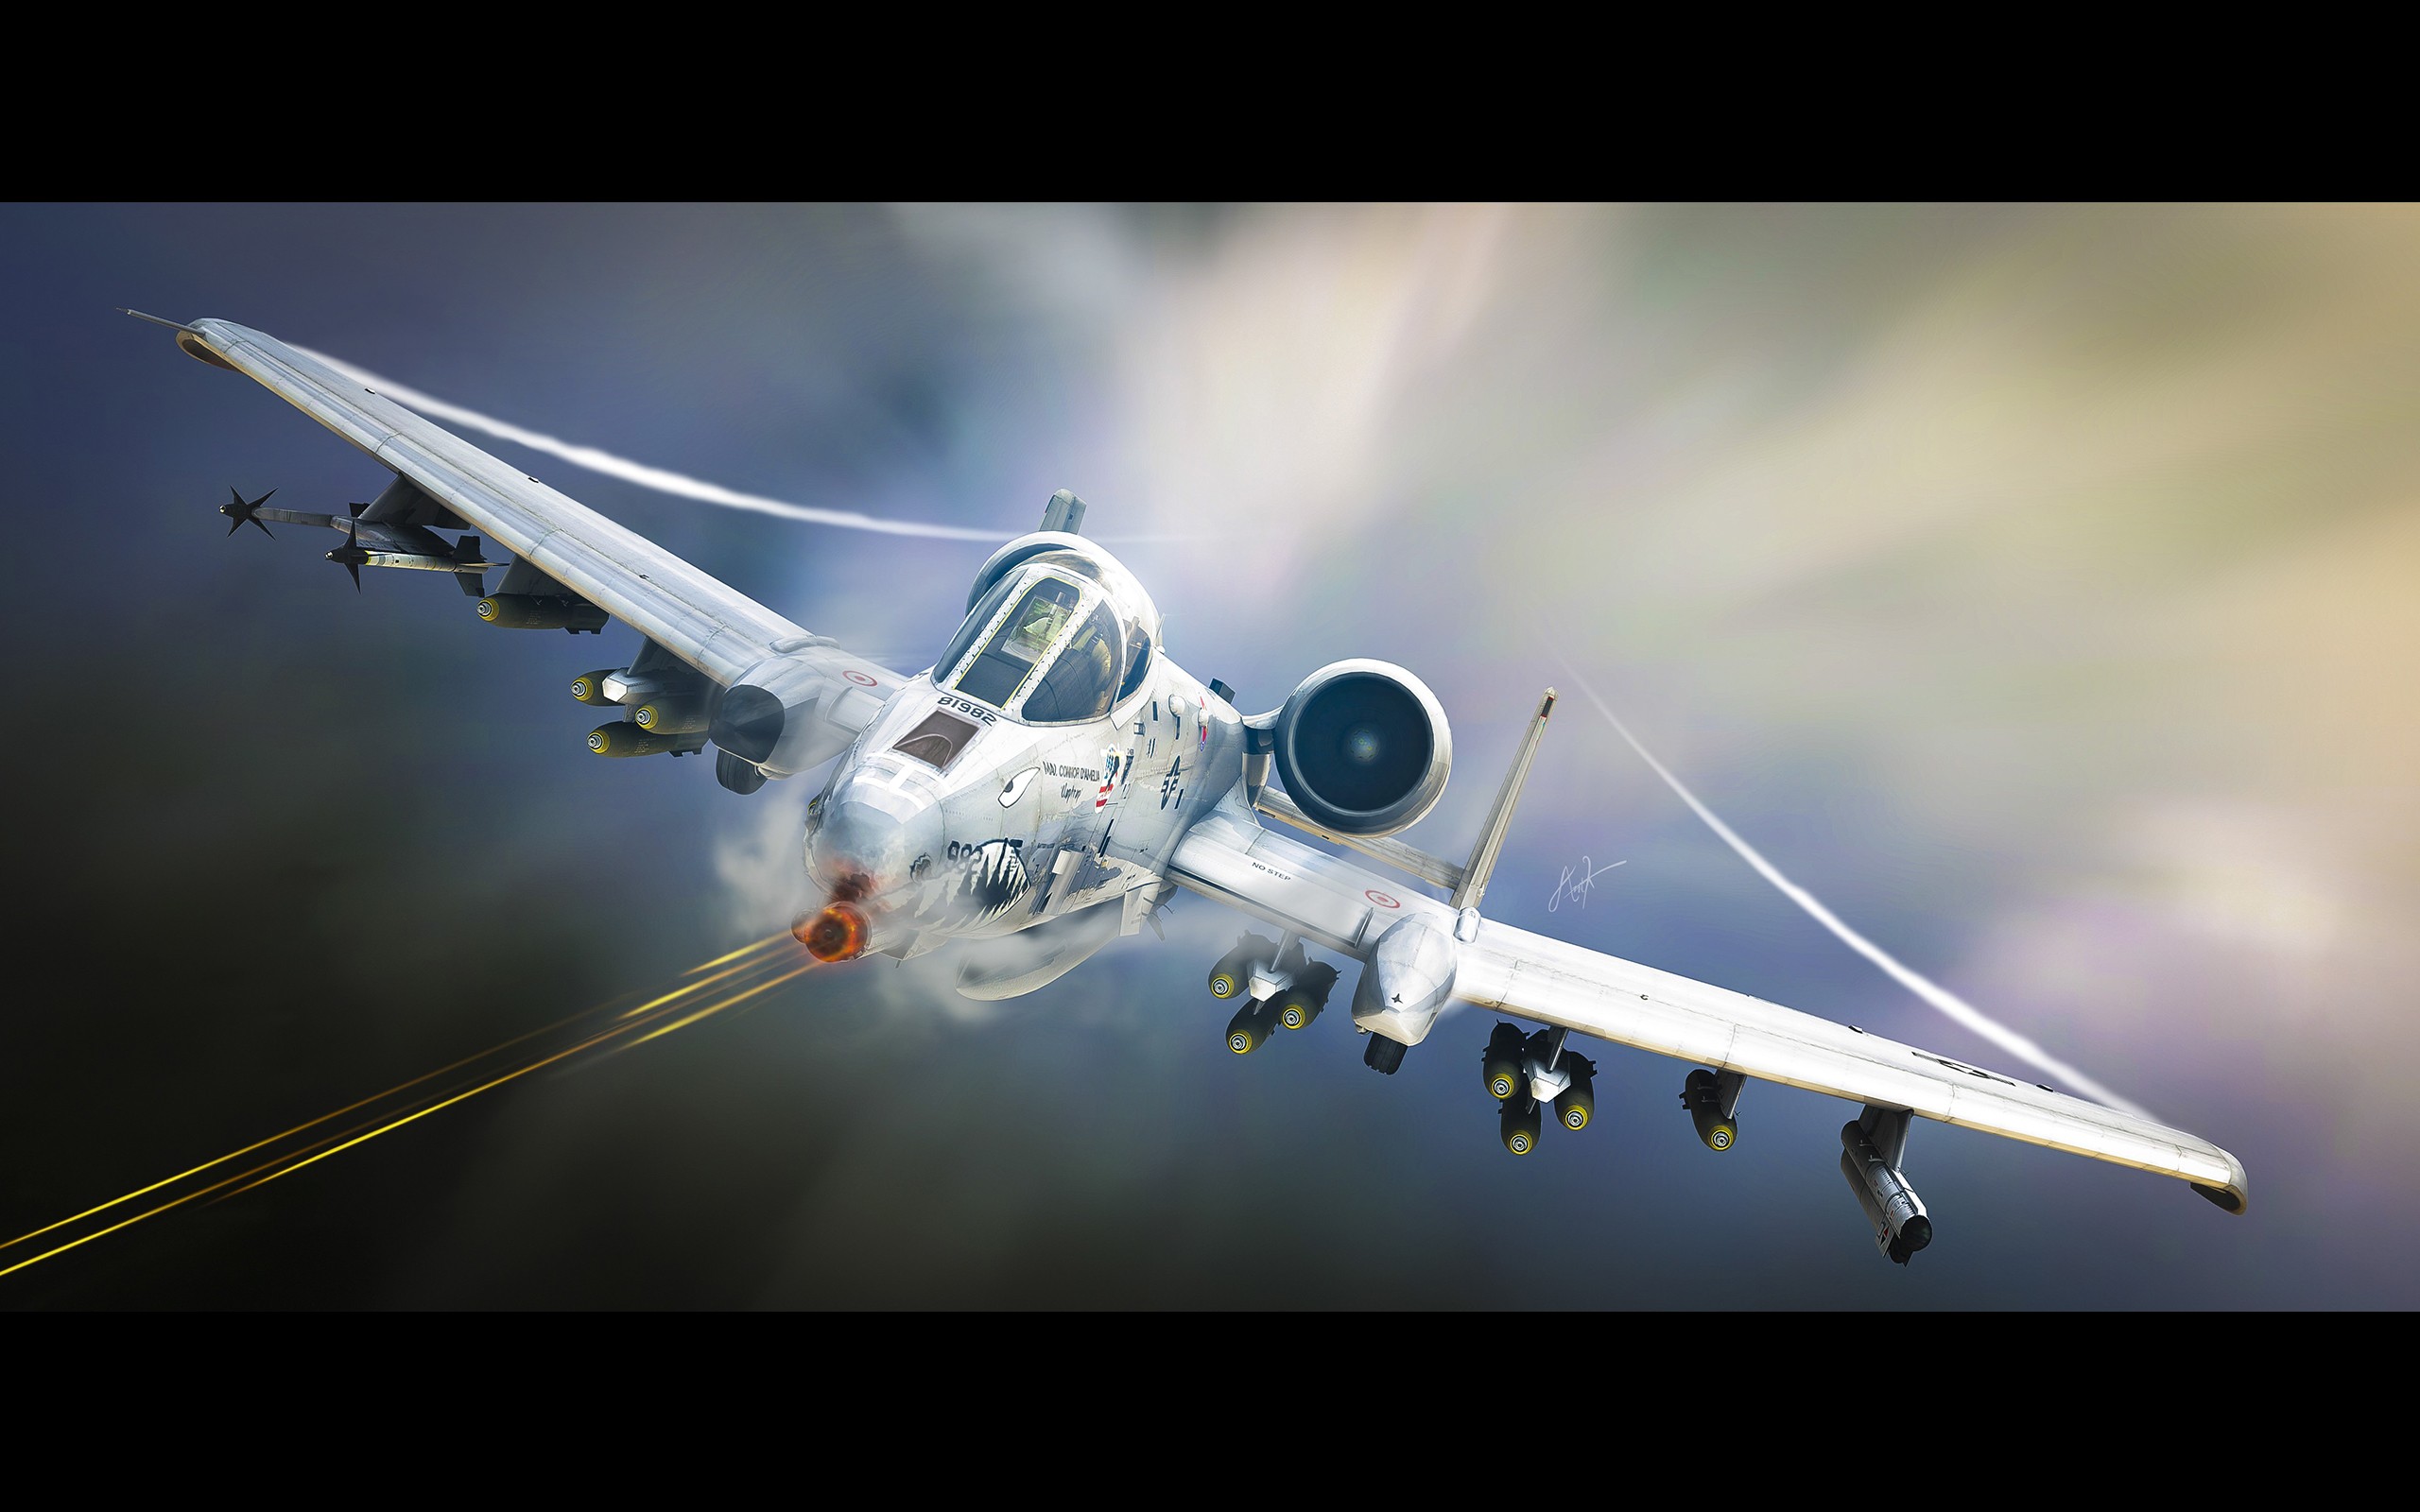 General 2560x1600 Fairchild Republic A-10 Thunderbolt II aircraft military aircraft military military vehicle vehicle American aircraft artwork frontal view signature clouds sky pilot flying missiles Star Atlas